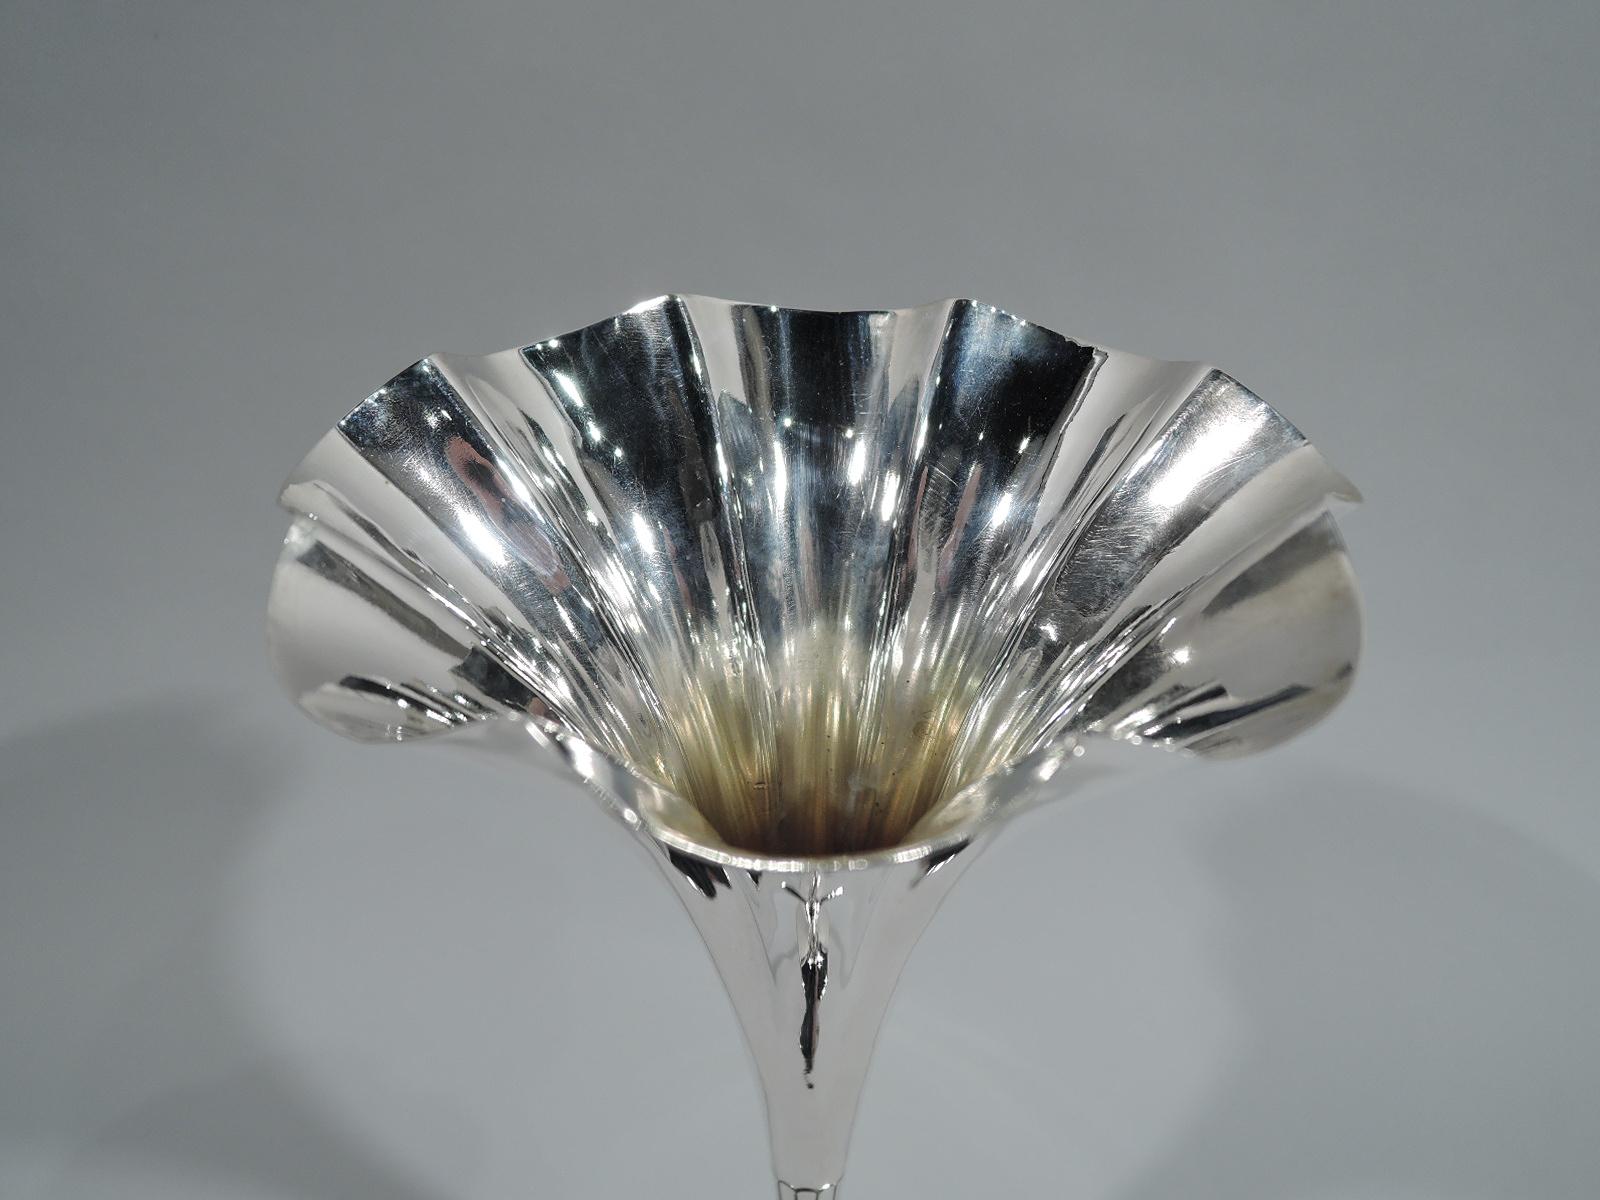 Edwardian sterling silver vase. Made by Tiffany & Co. in New York. Elongated cone on small dome set in flat circular foot. Flutes and applied beads. Fully marked including pattern no. 11908 and director’s letter T (1892-1902). Weight: 7 troy ounces.